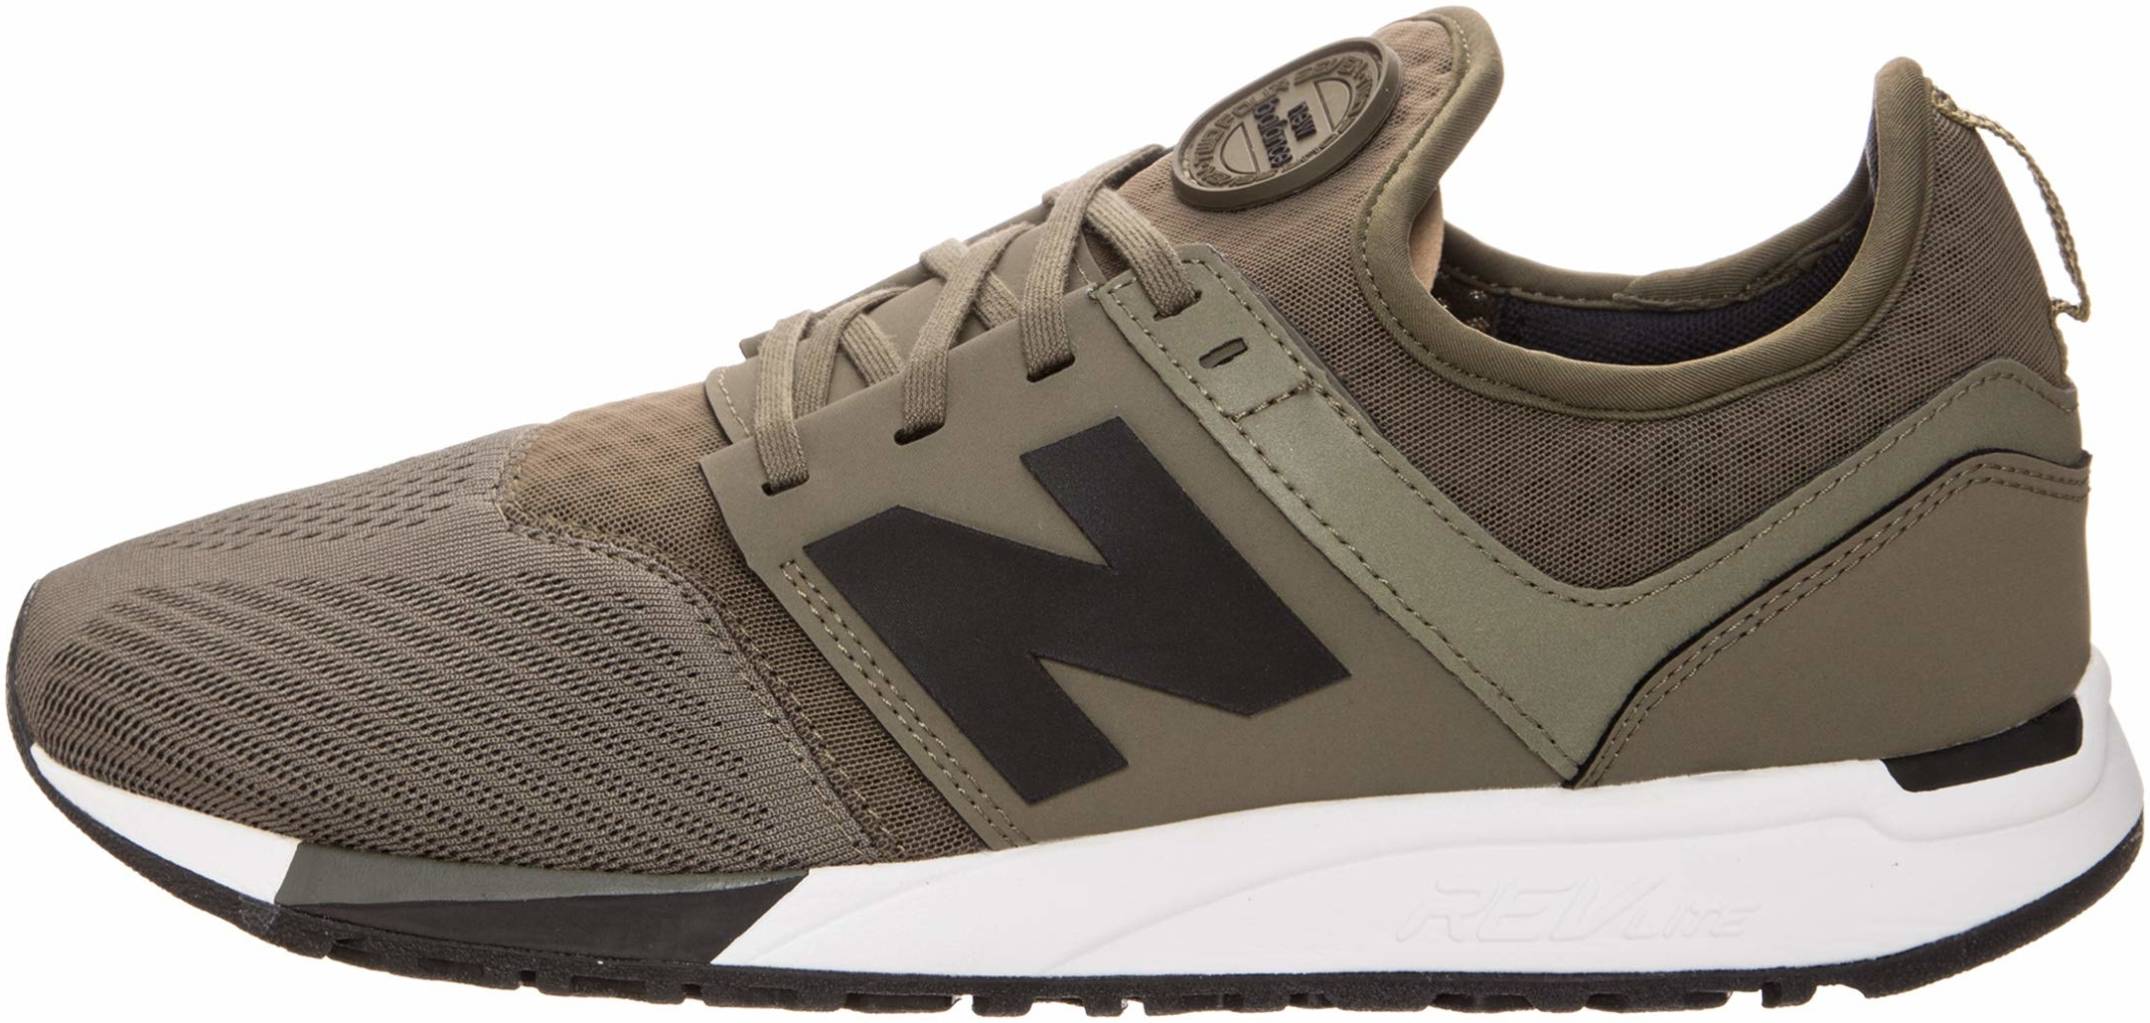 New Balance 247 Sport sneakers (only $60) | RunRepeat